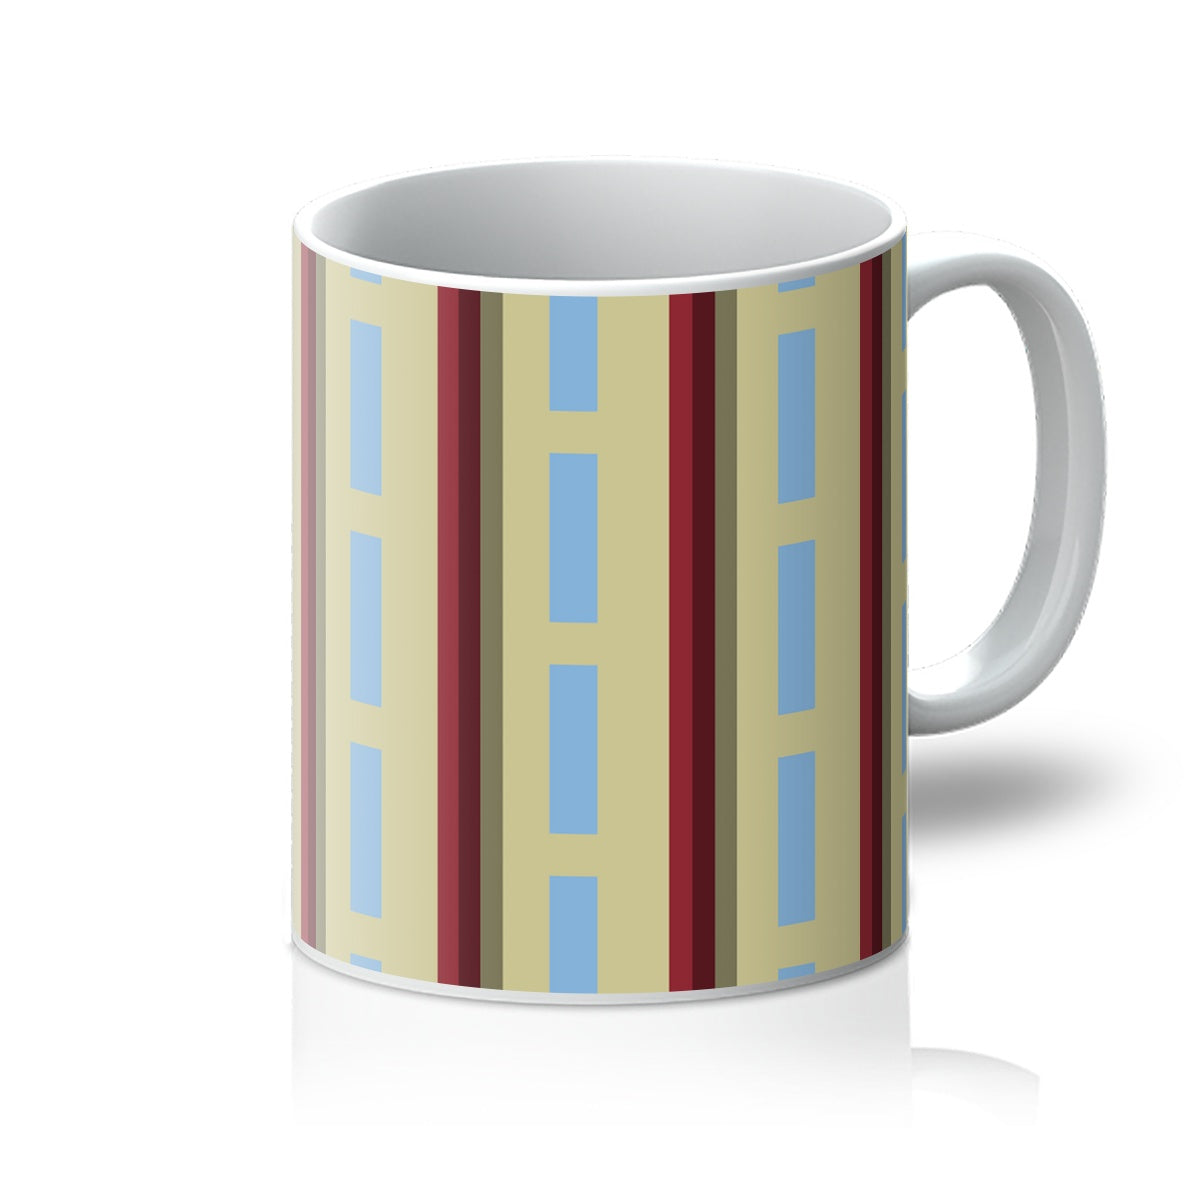 This ceramic coffee mug has a vintage style patterned design of vermilion red and cerulean blue stripes against a cream background